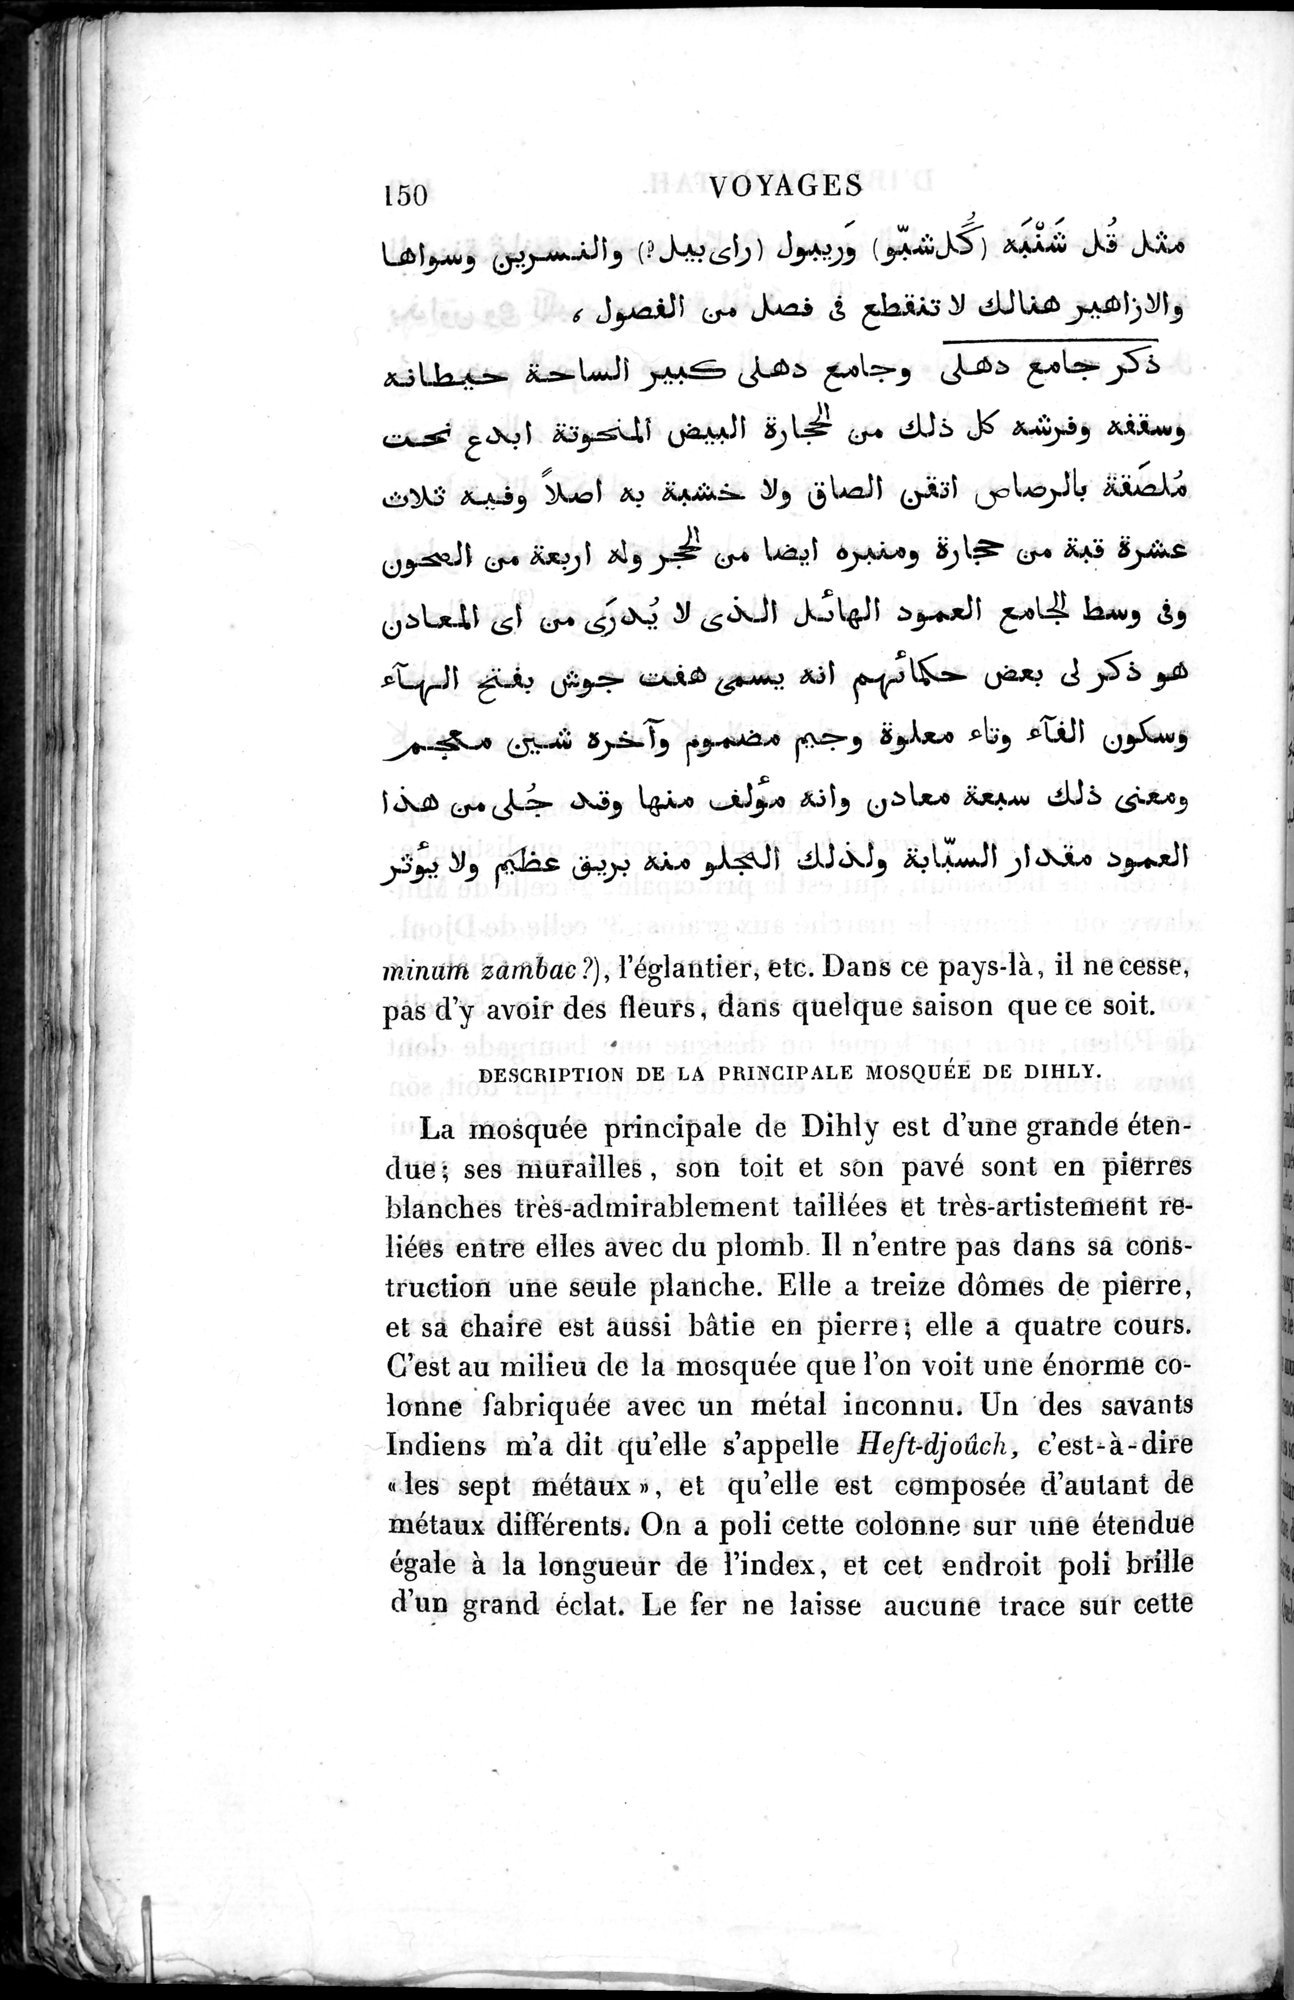 Voyages d'Ibn Batoutah : vol.3 / Page 190 (Grayscale High Resolution Image)